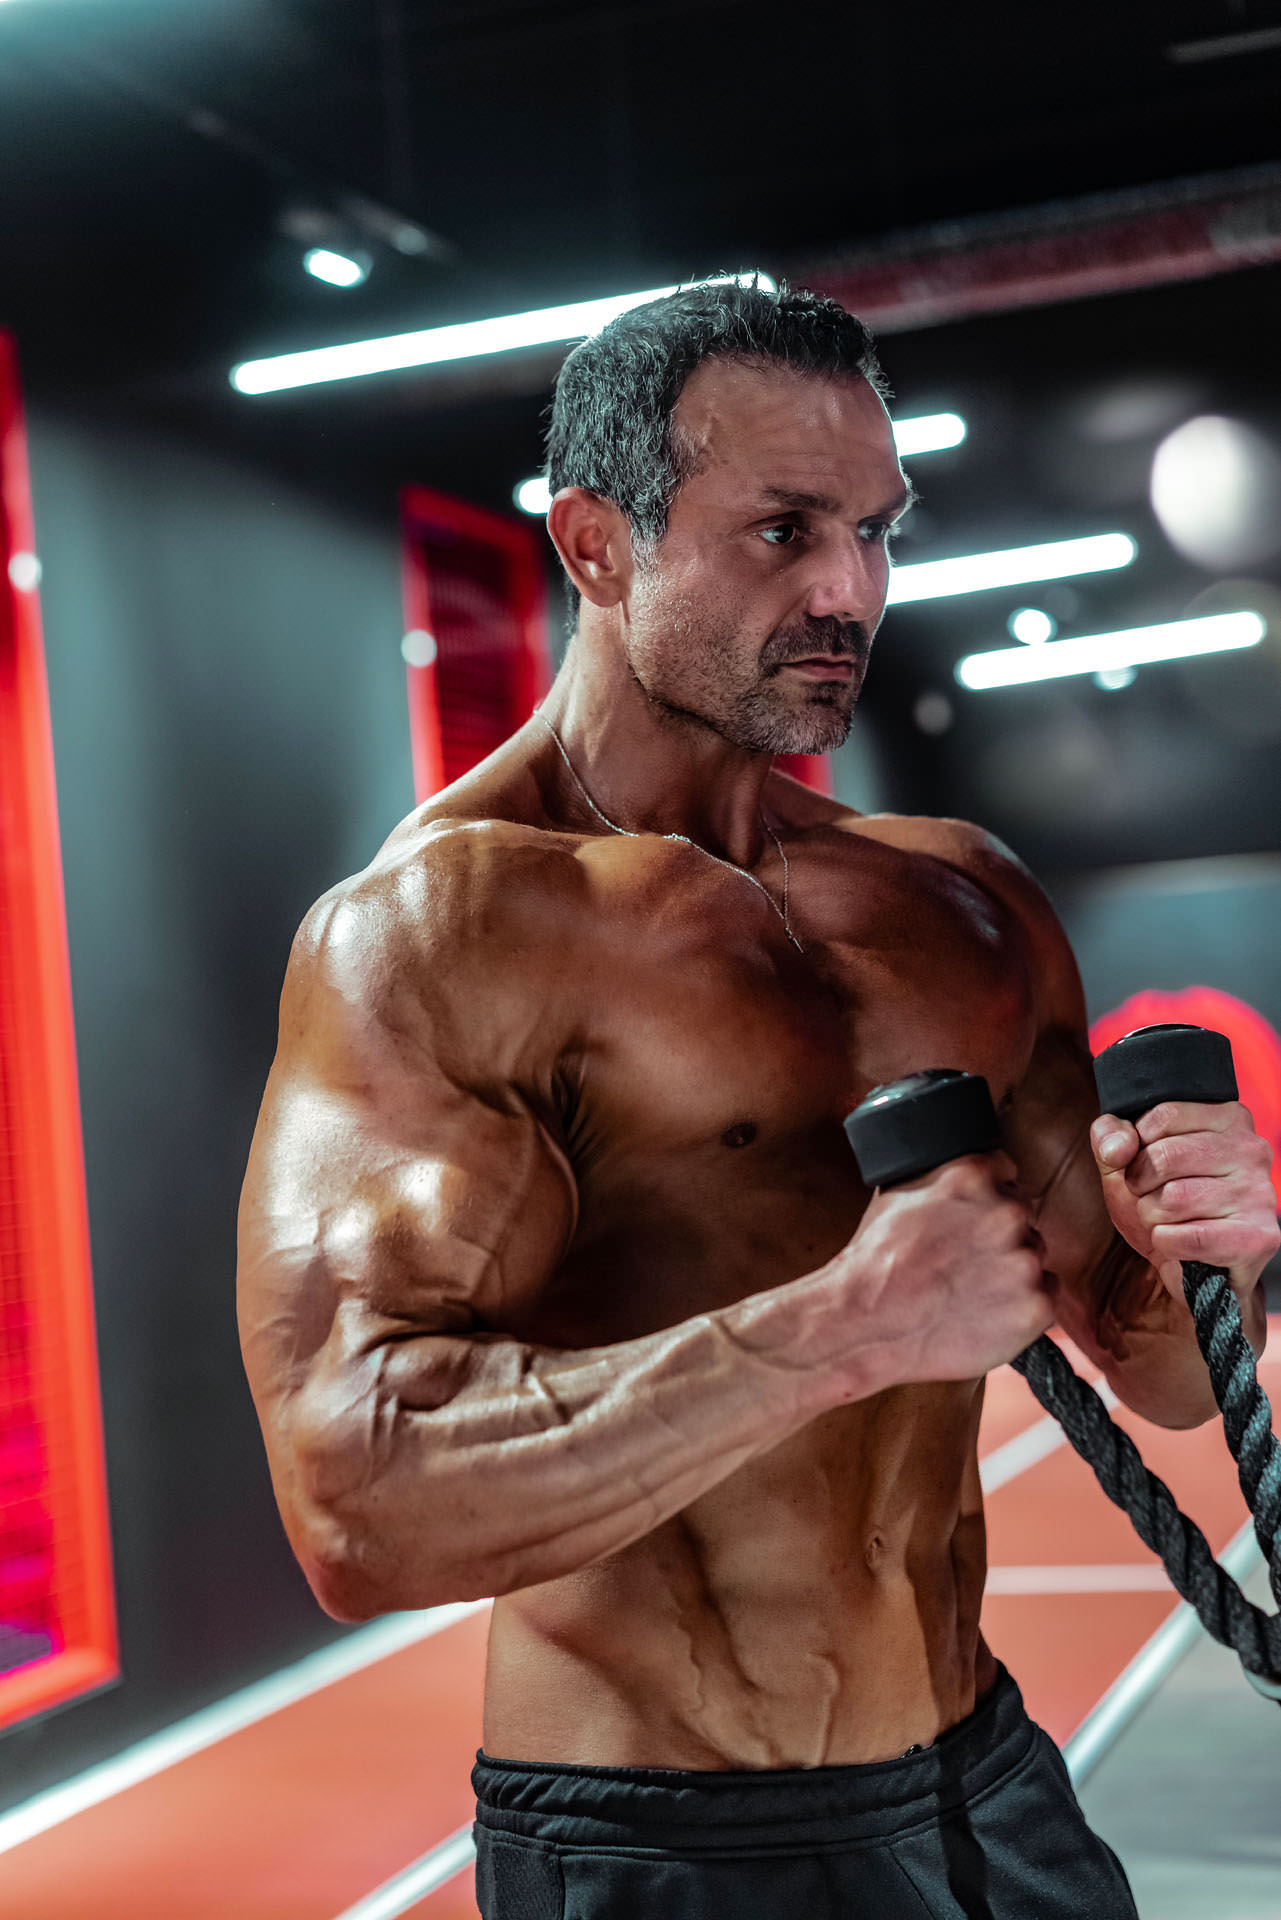 2019-03-04 - Enzo - Muscle & Fitness - 06789 - 1920px